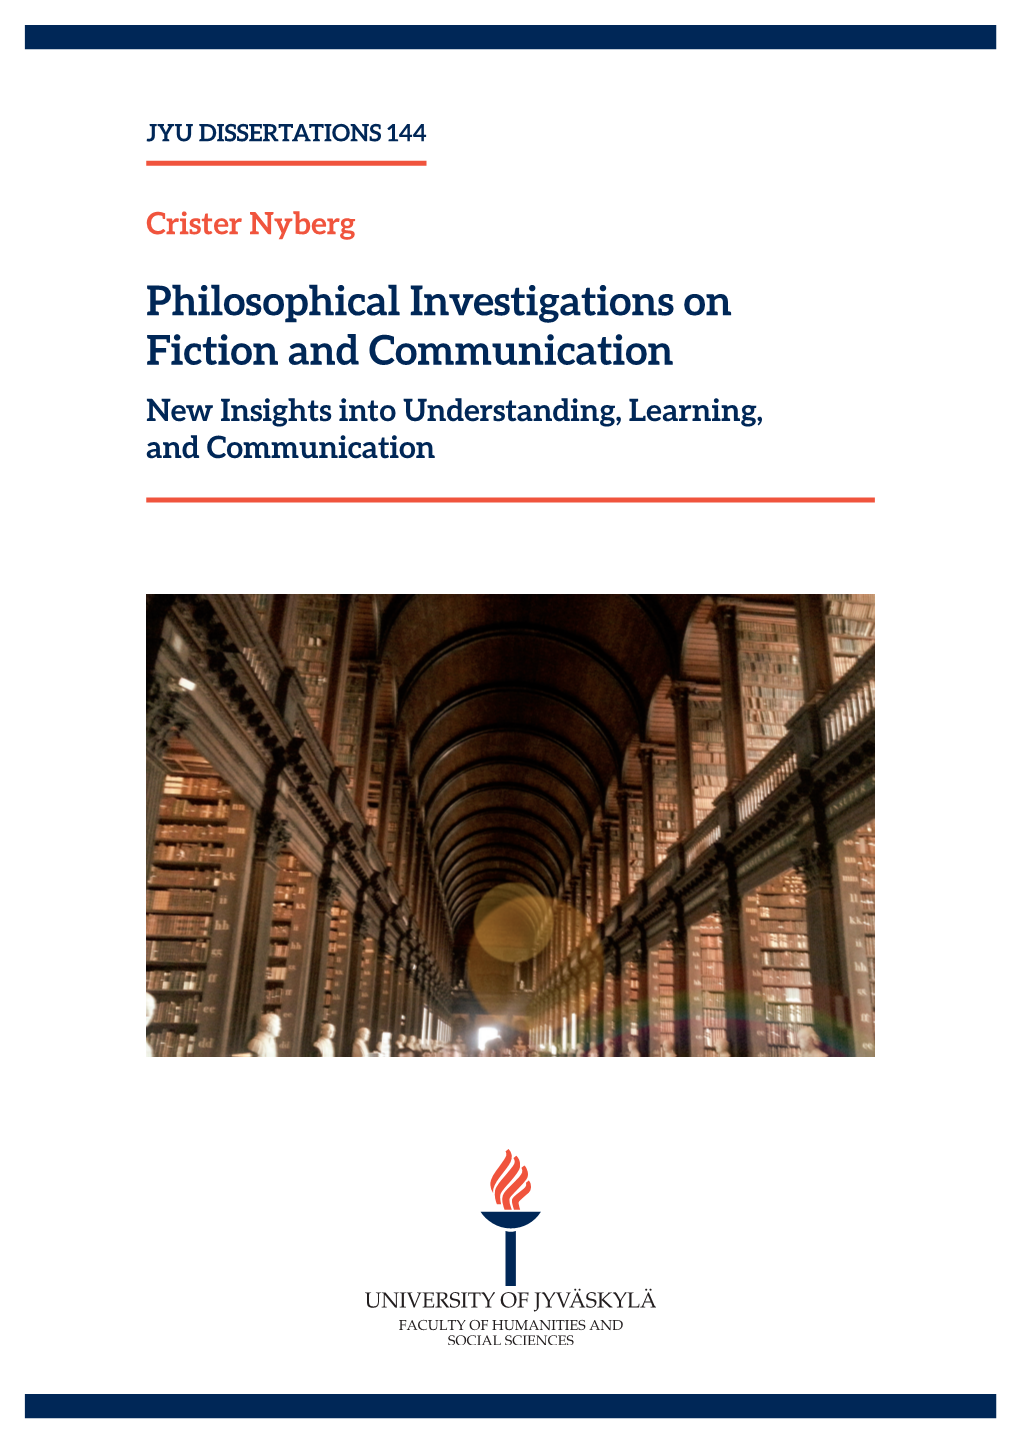 Philosophical Investigations on Fiction and Communication. New Insights Into Understanding, Learning and Communication